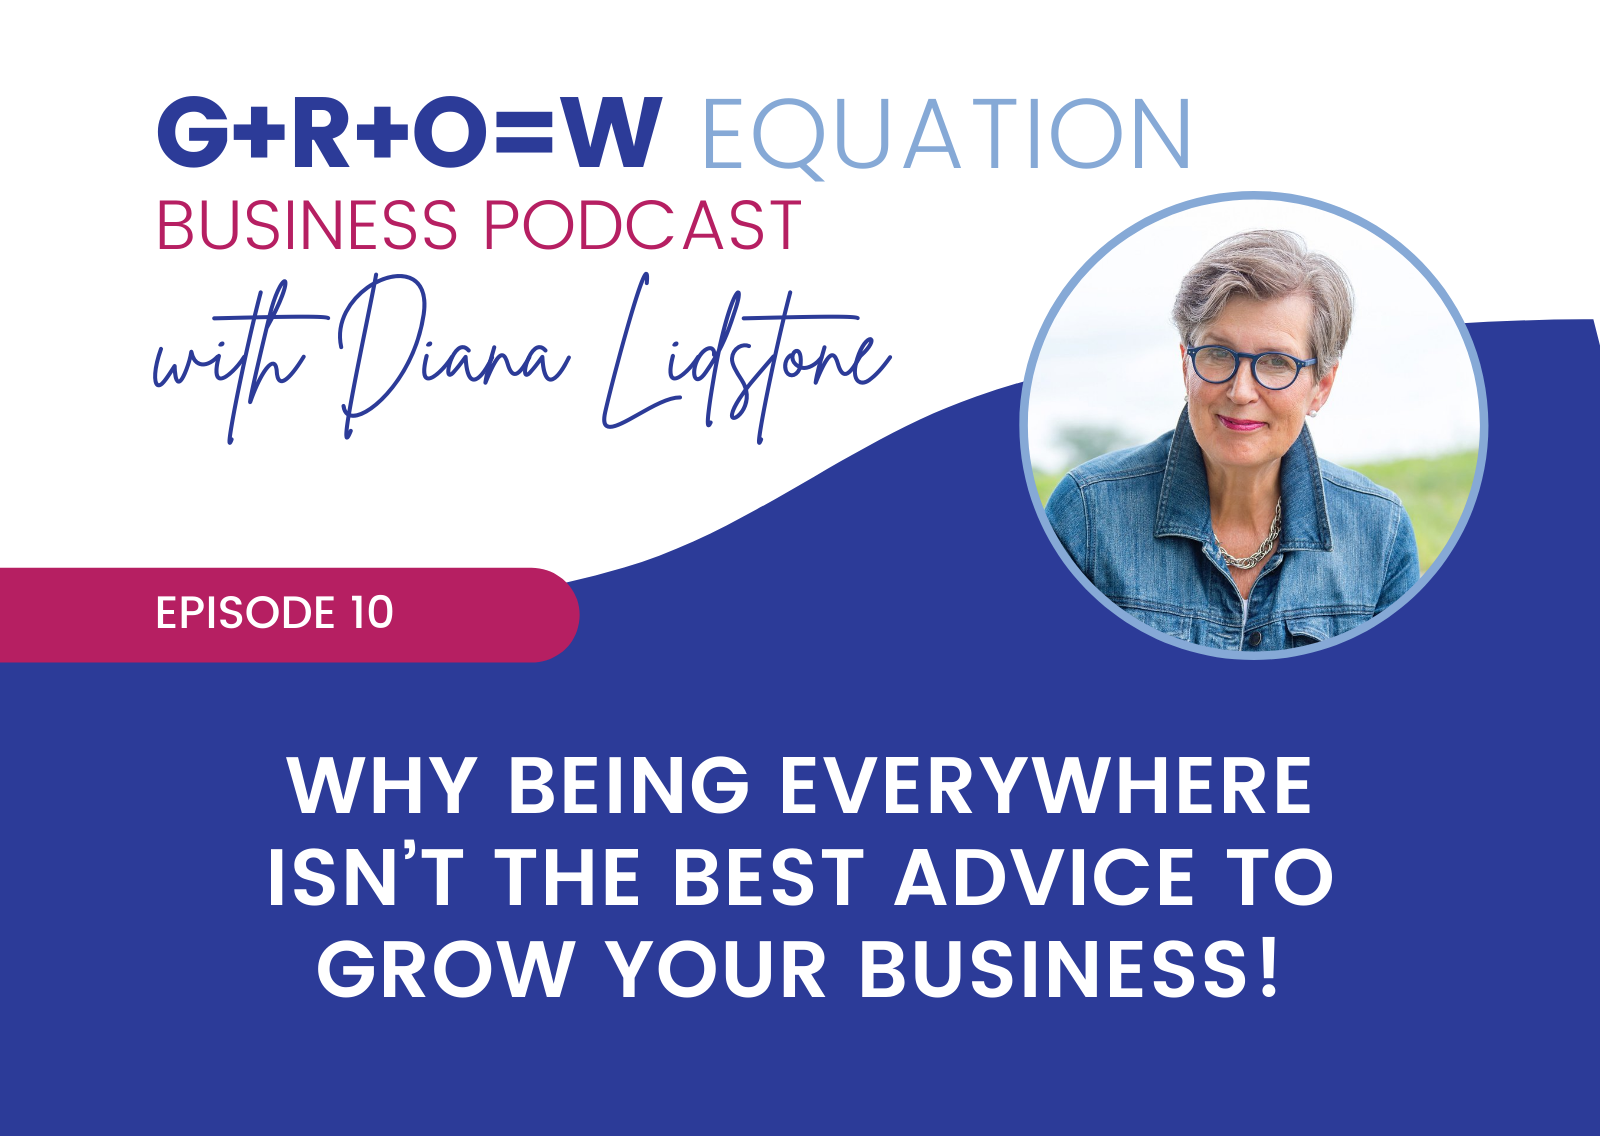 Why Being Everywhere Isn’t the Best Advice to Grow Your Business!